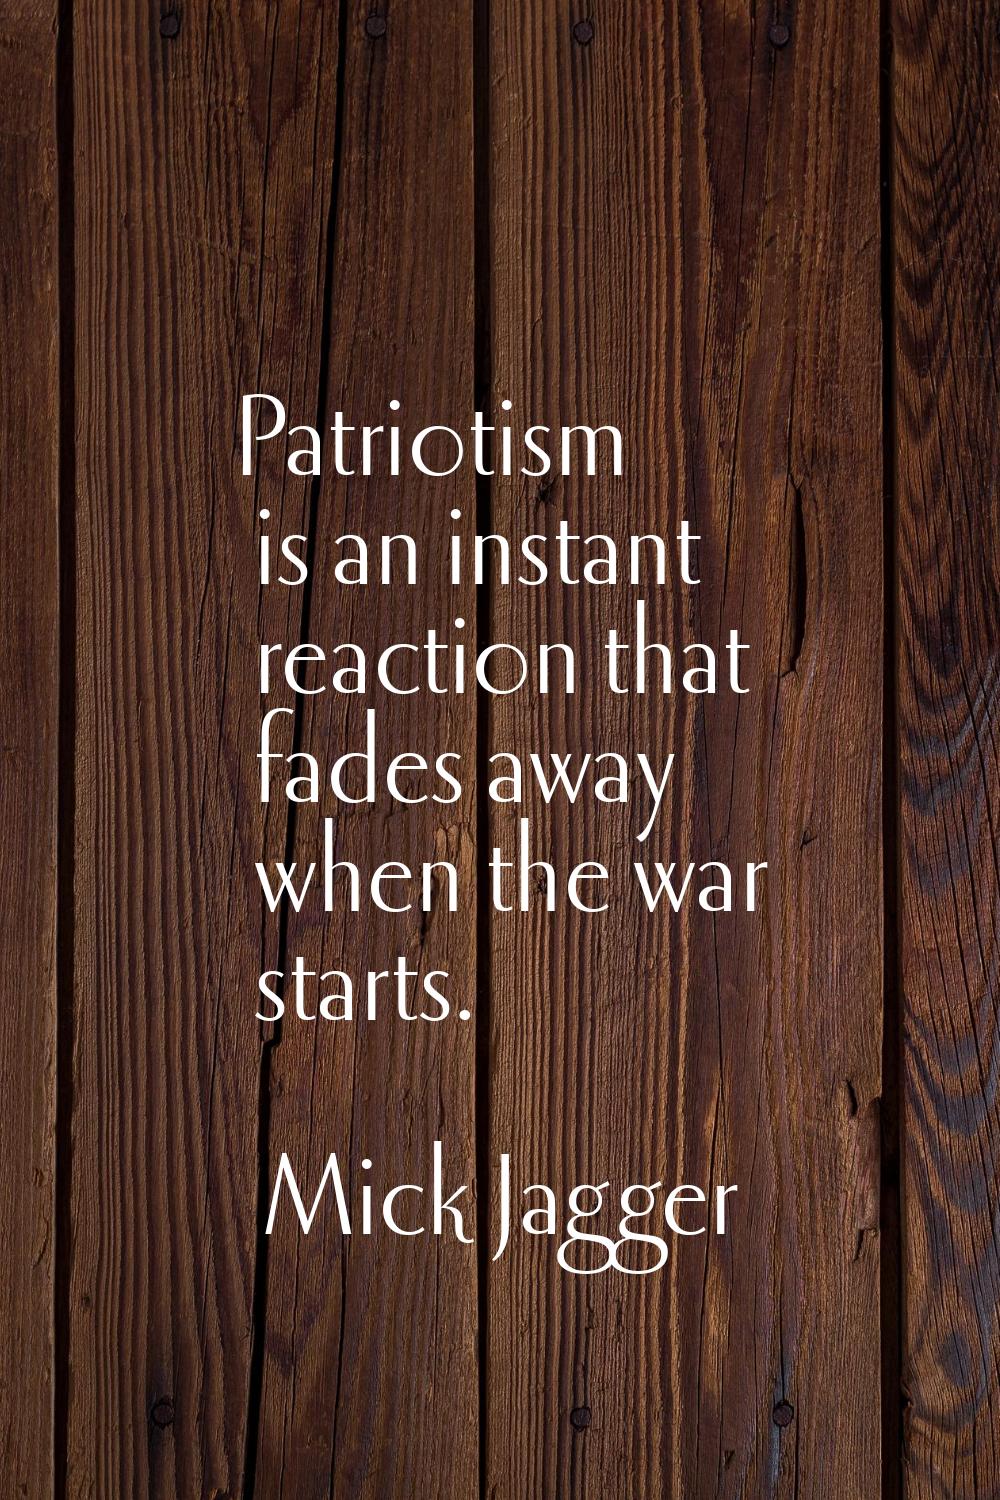 Patriotism is an instant reaction that fades away when the war starts.